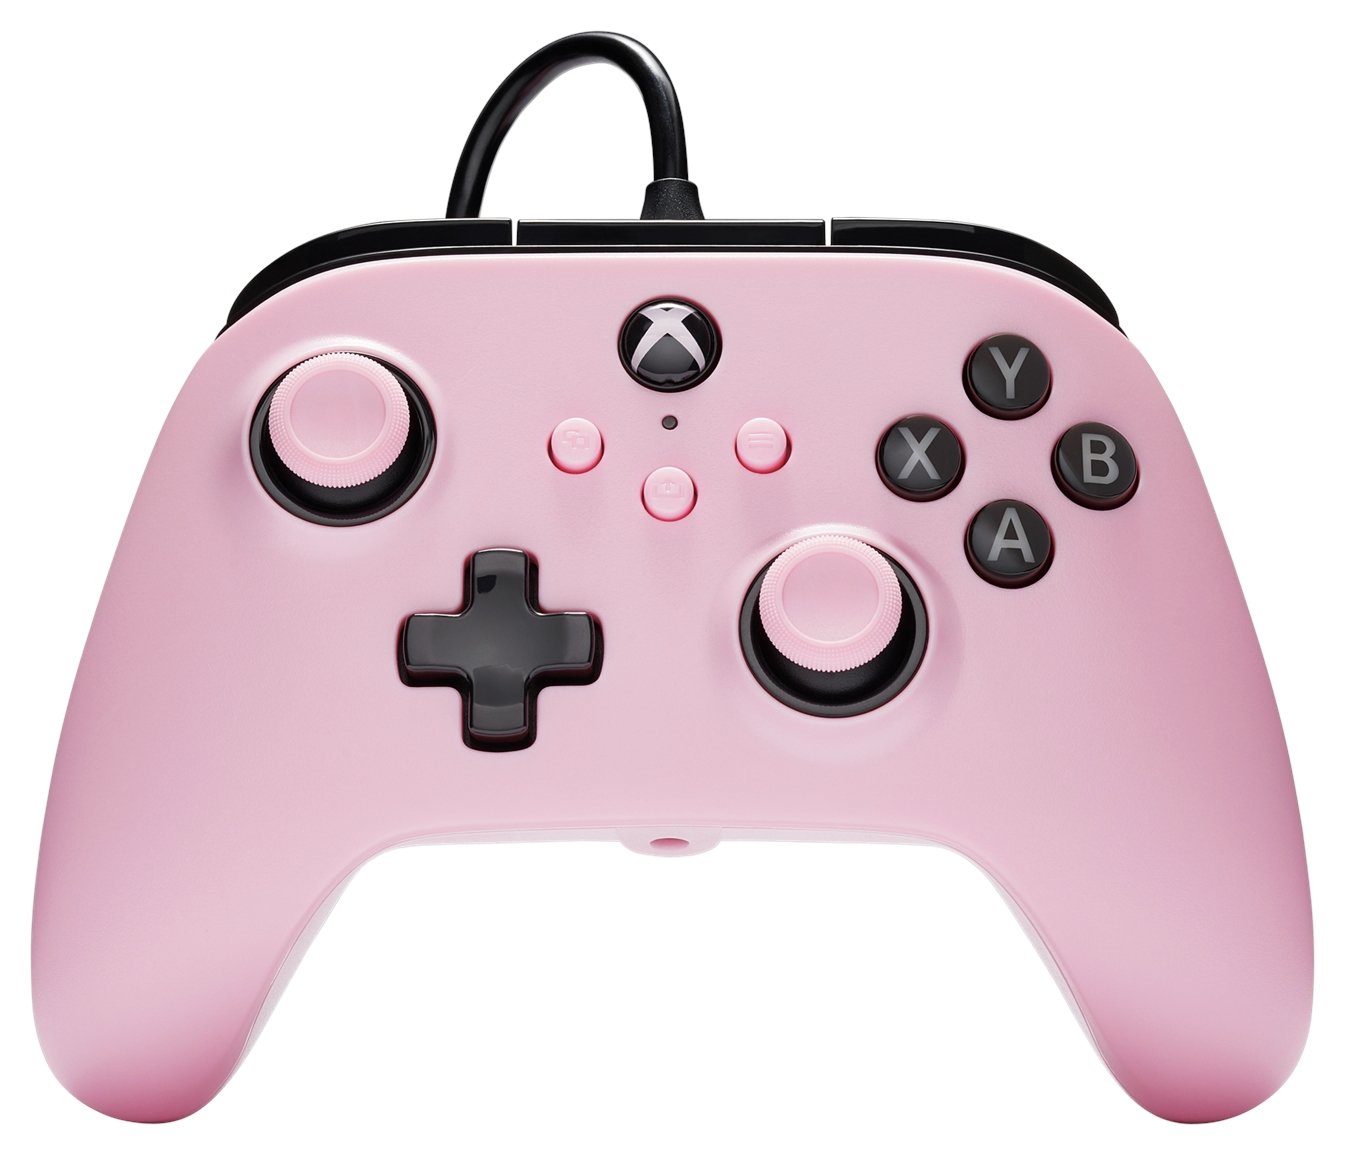 PowerA Xbox Series X/S & One Wired Controller - Core Blush